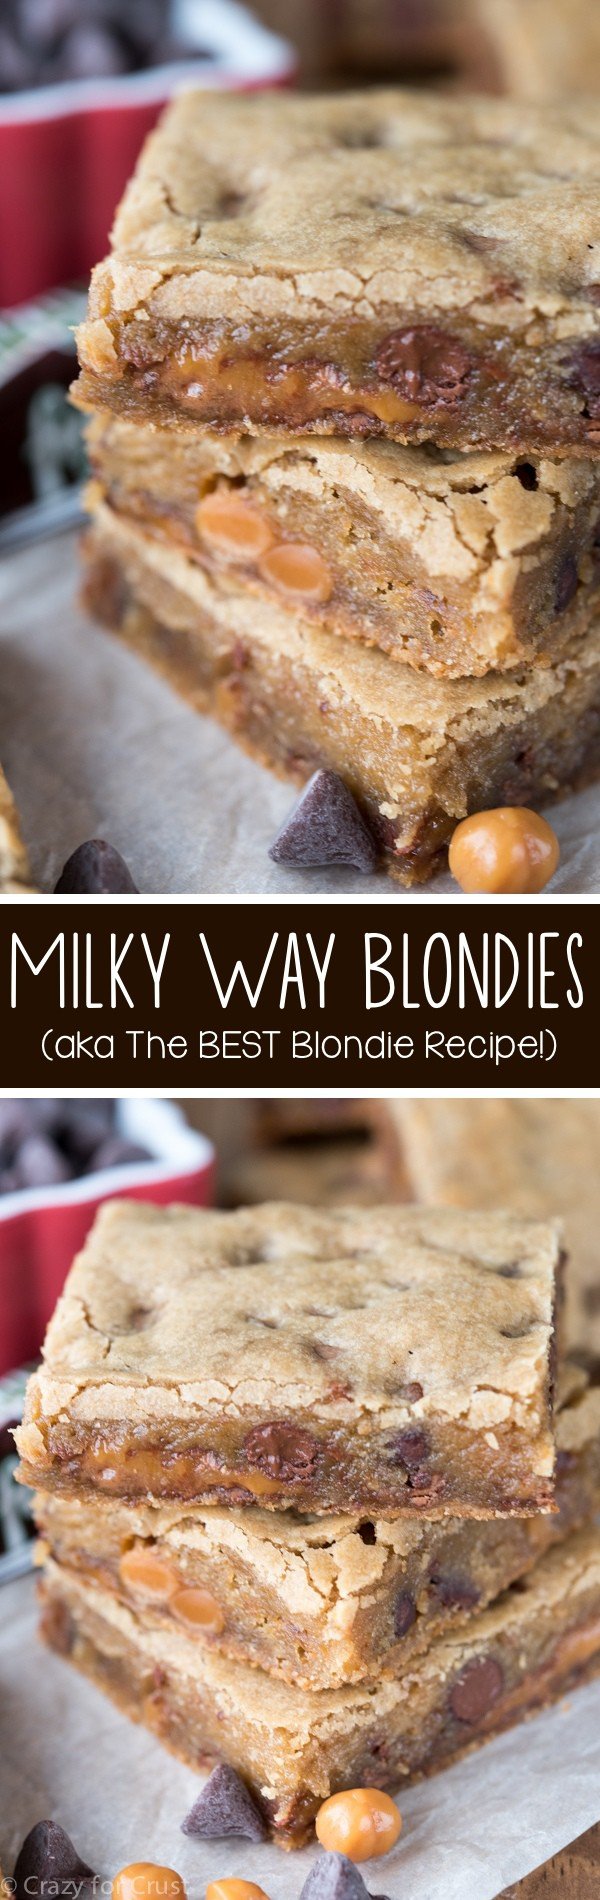 Milky Way Blondies - this is the BEST Blondie recipe! The base recipe is so easy and can be made any way you like them!